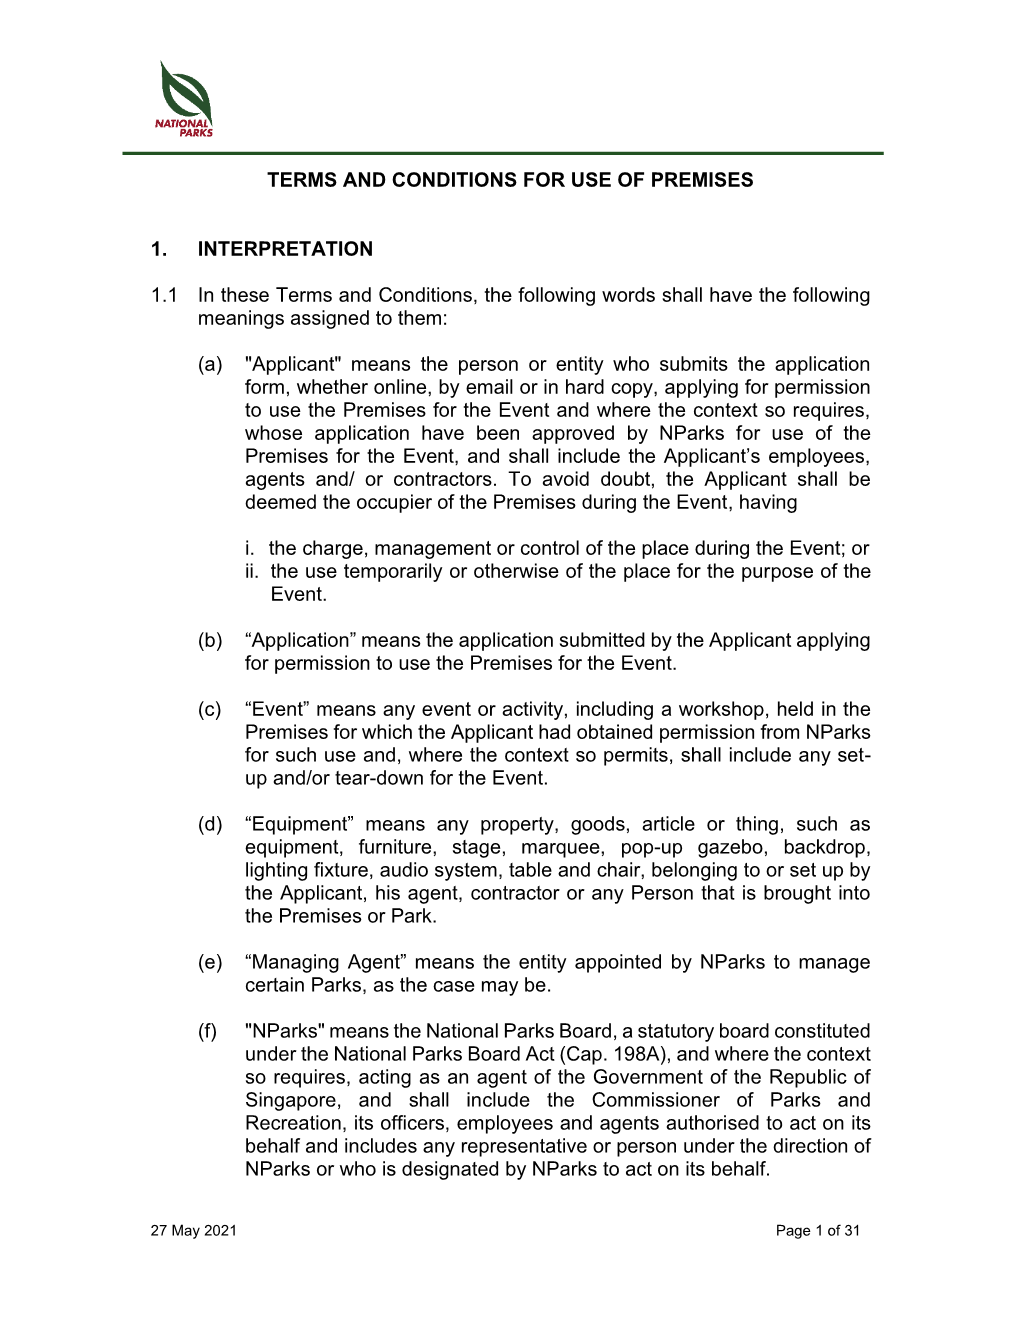 Terms and Conditions for Use of Premises